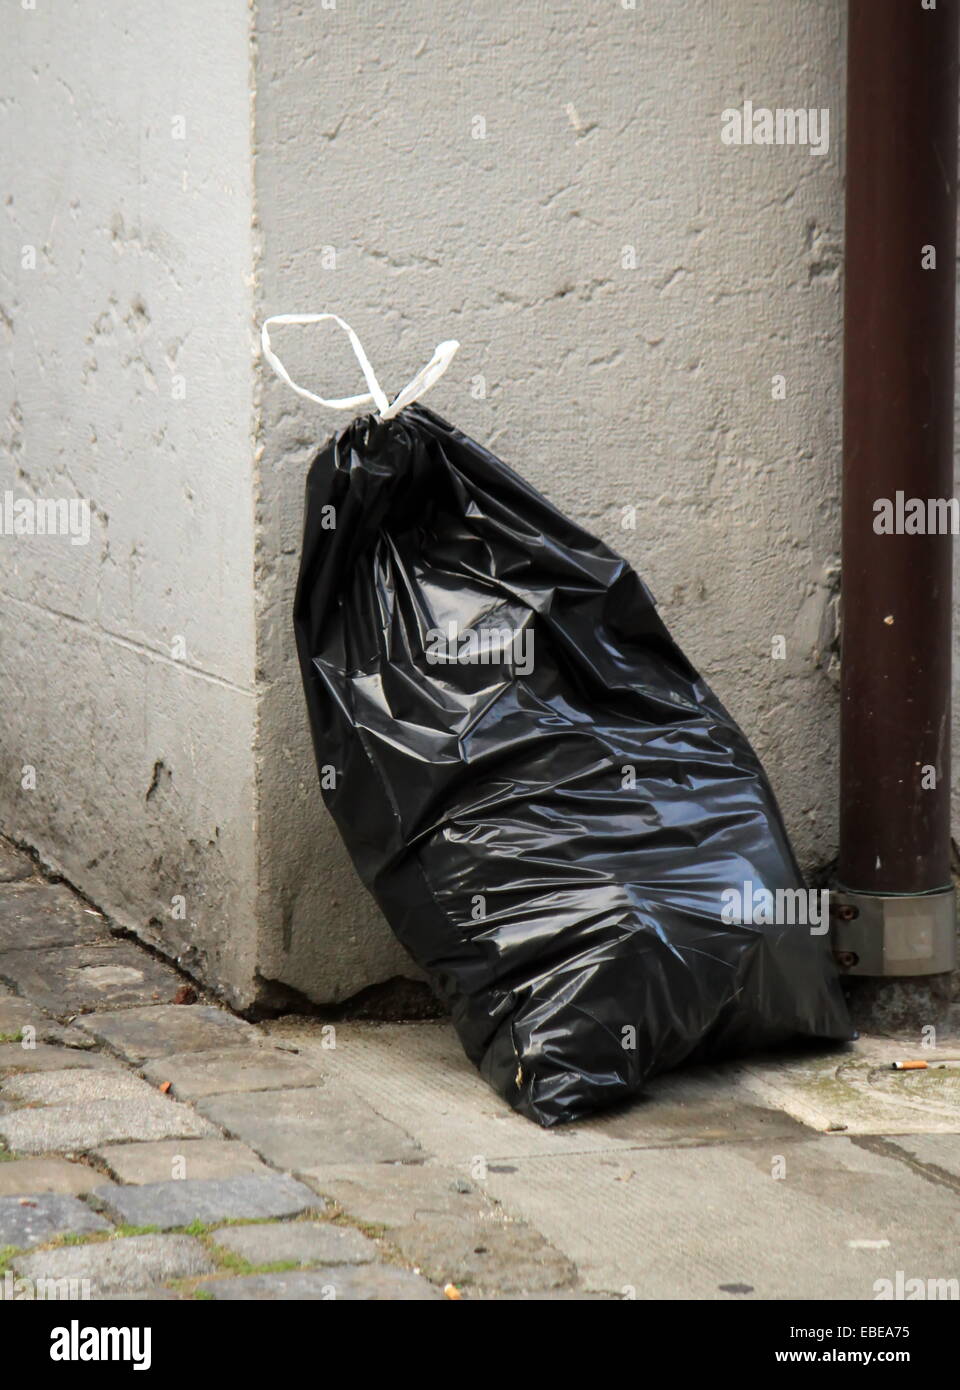 https://c8.alamy.com/comp/EBEA75/one-black-garbage-bag-in-the-street-against-a-wall-EBEA75.jpg